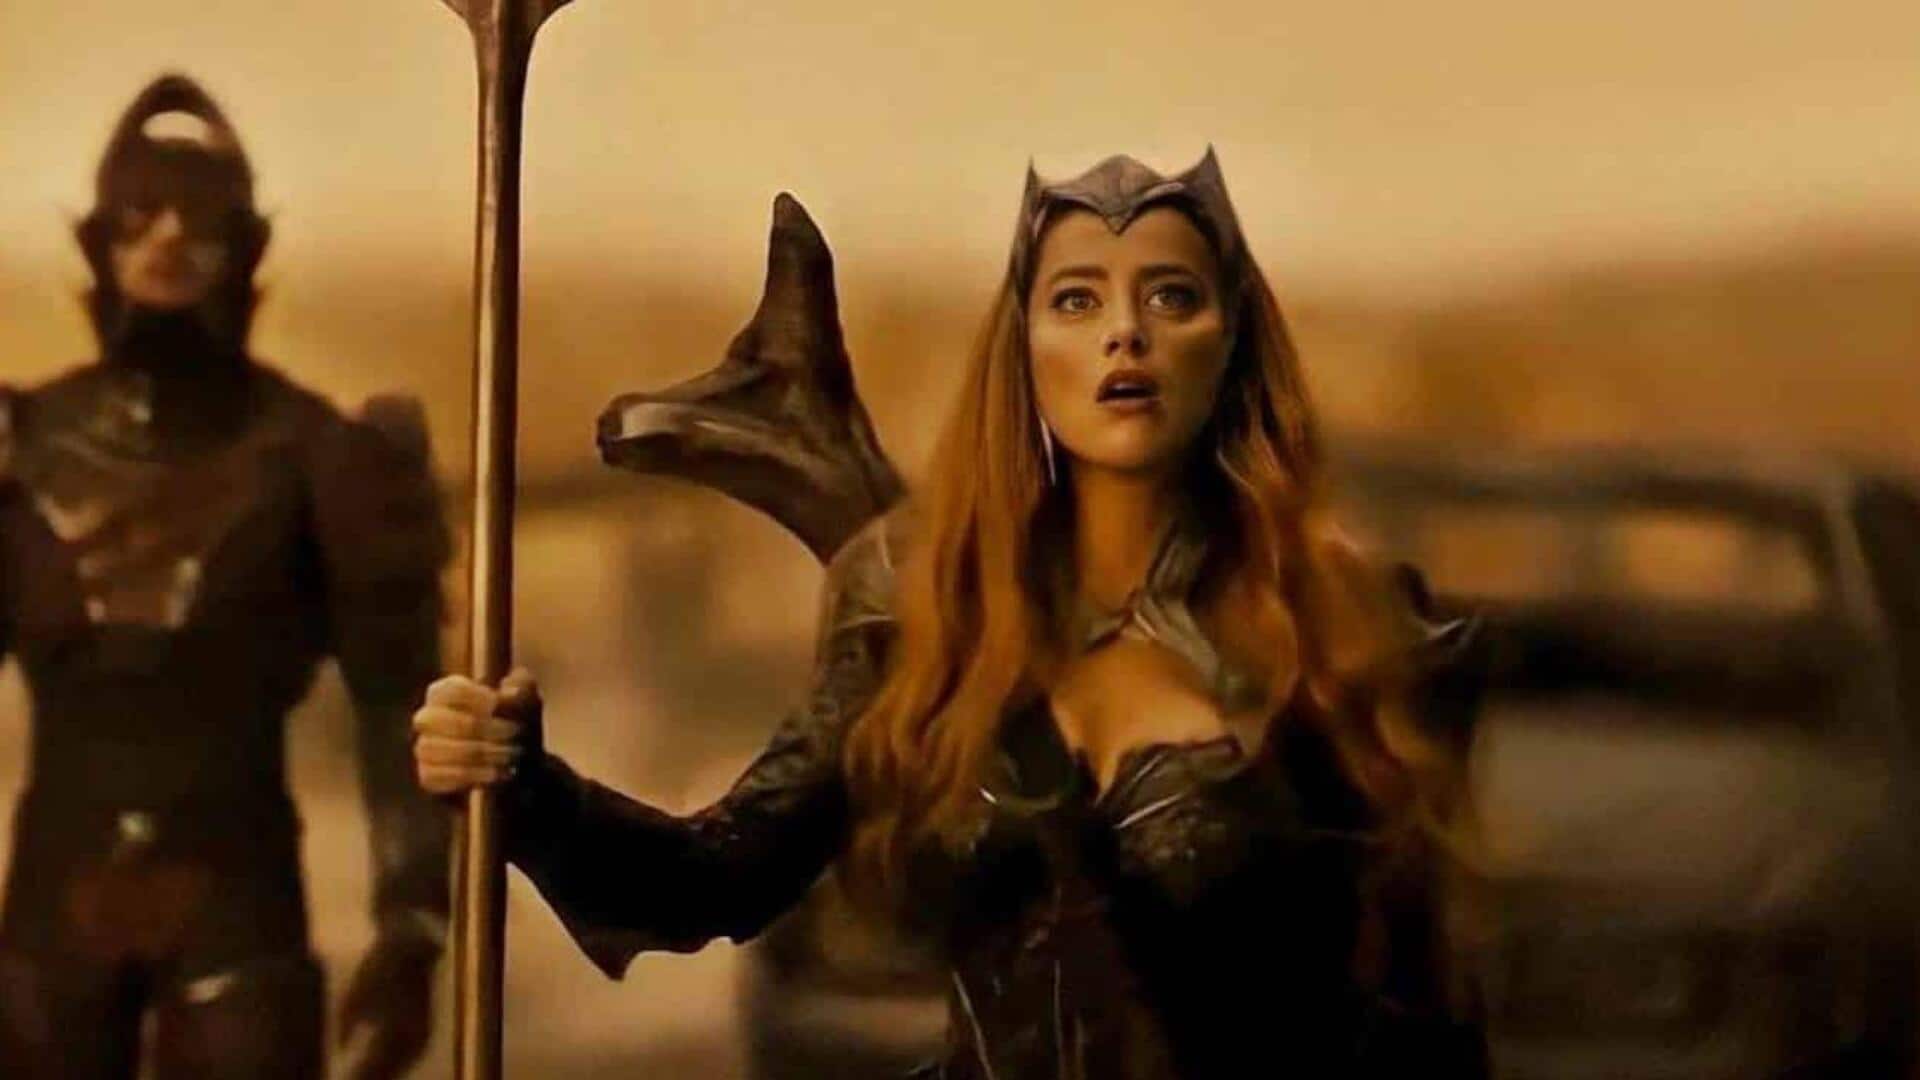 How things turned sour for Amber Heard on 'Aquaman2' sets